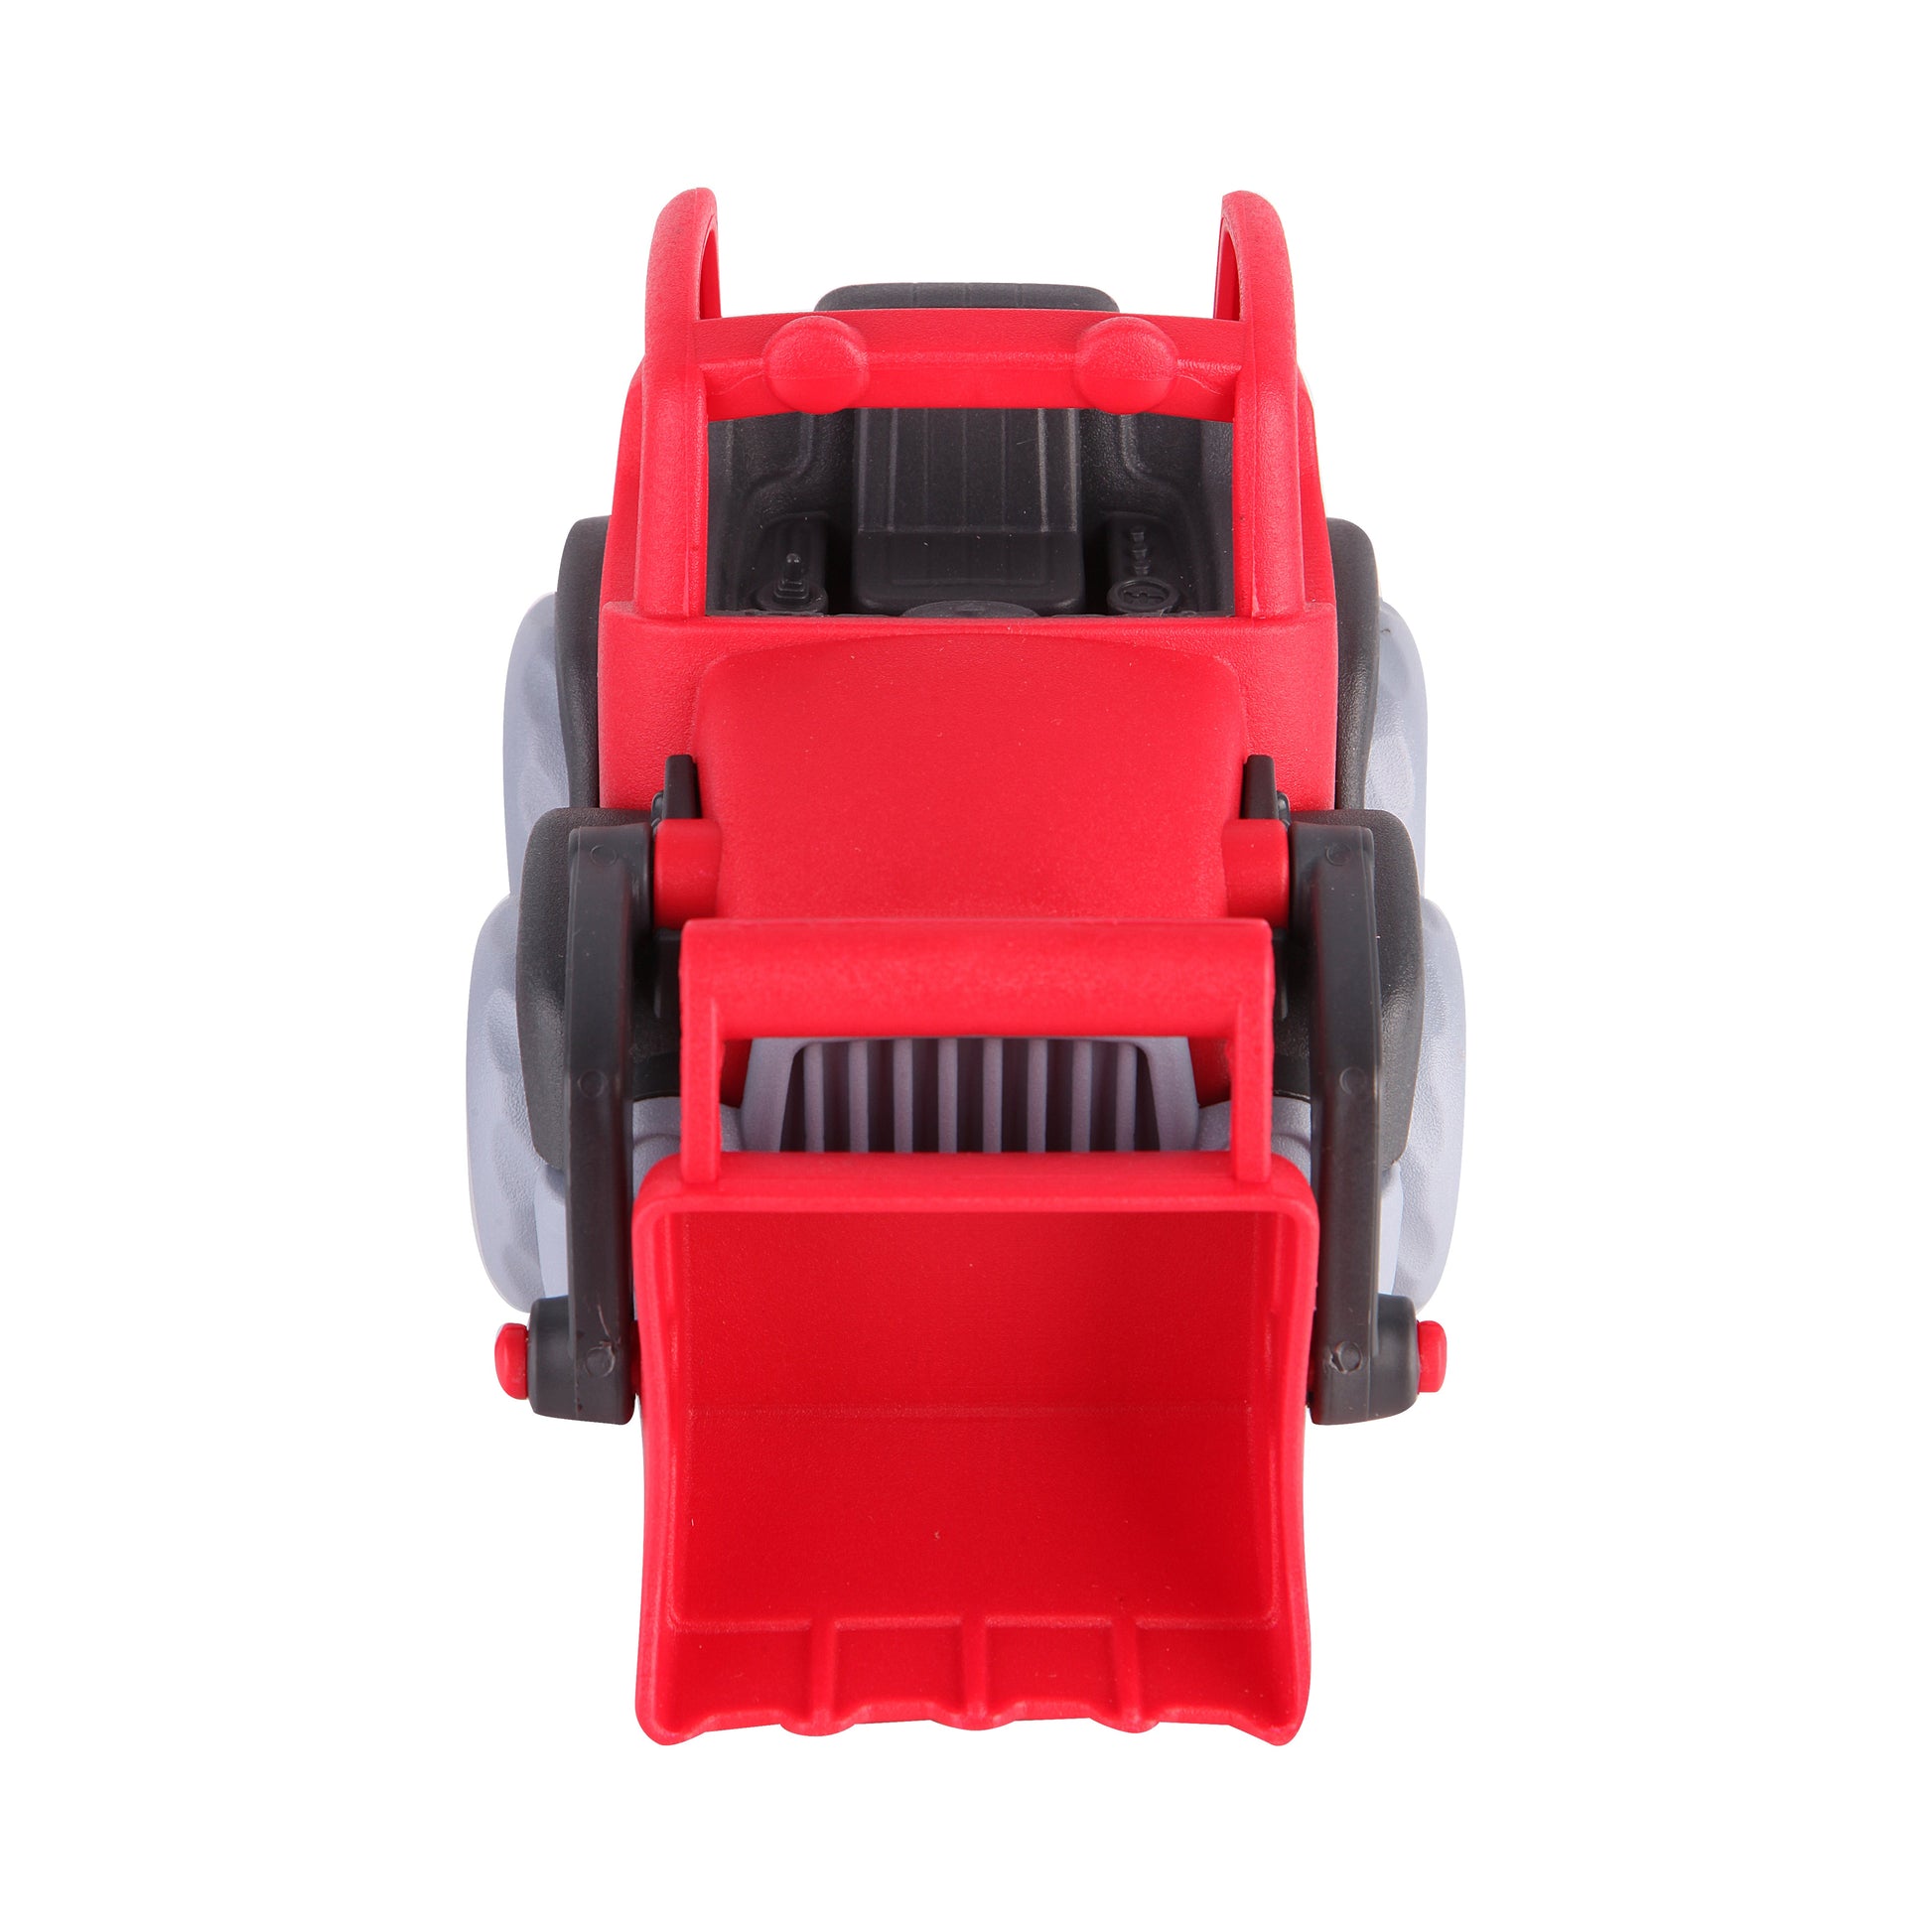 Red Mini Loader-Car, catveh, Communication, Coordination, Imagination, Language, Loader, Motor, Pretend, Red, Skills, Toy, Tractor, Truck, Wheels-Let's Be Child-[Too Twee]-[Tootwee]-[baby]-[newborn]-[clothes]-[essentials]-[toys]-[Lebanon]